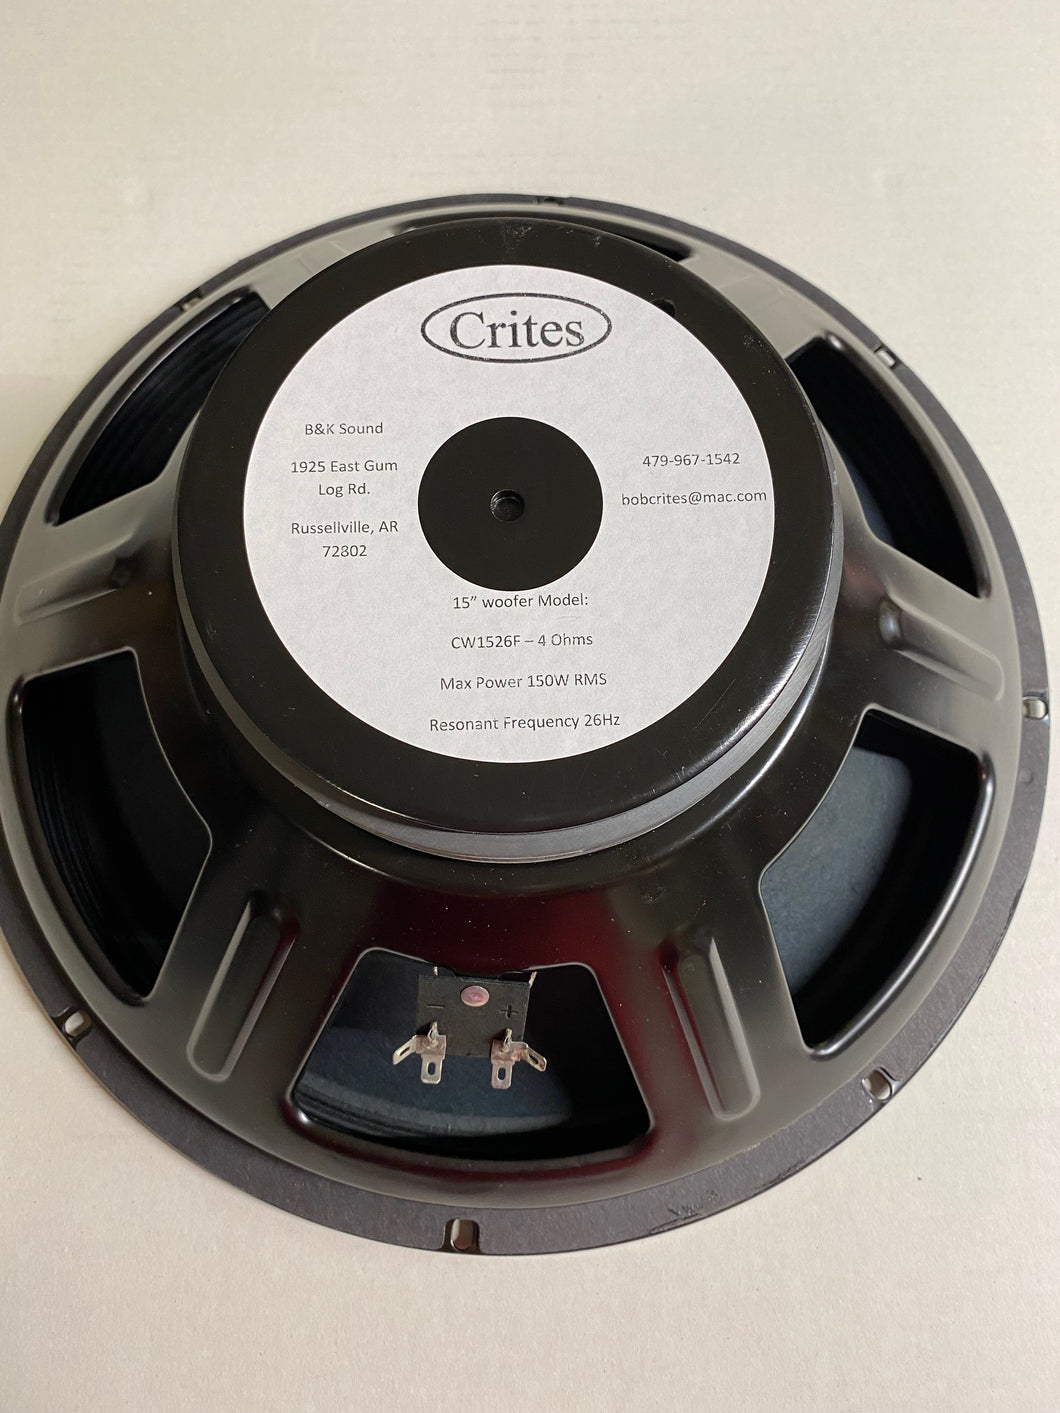 CW1526F Steel Frame Woofer - Pair - FREE US Shipping!